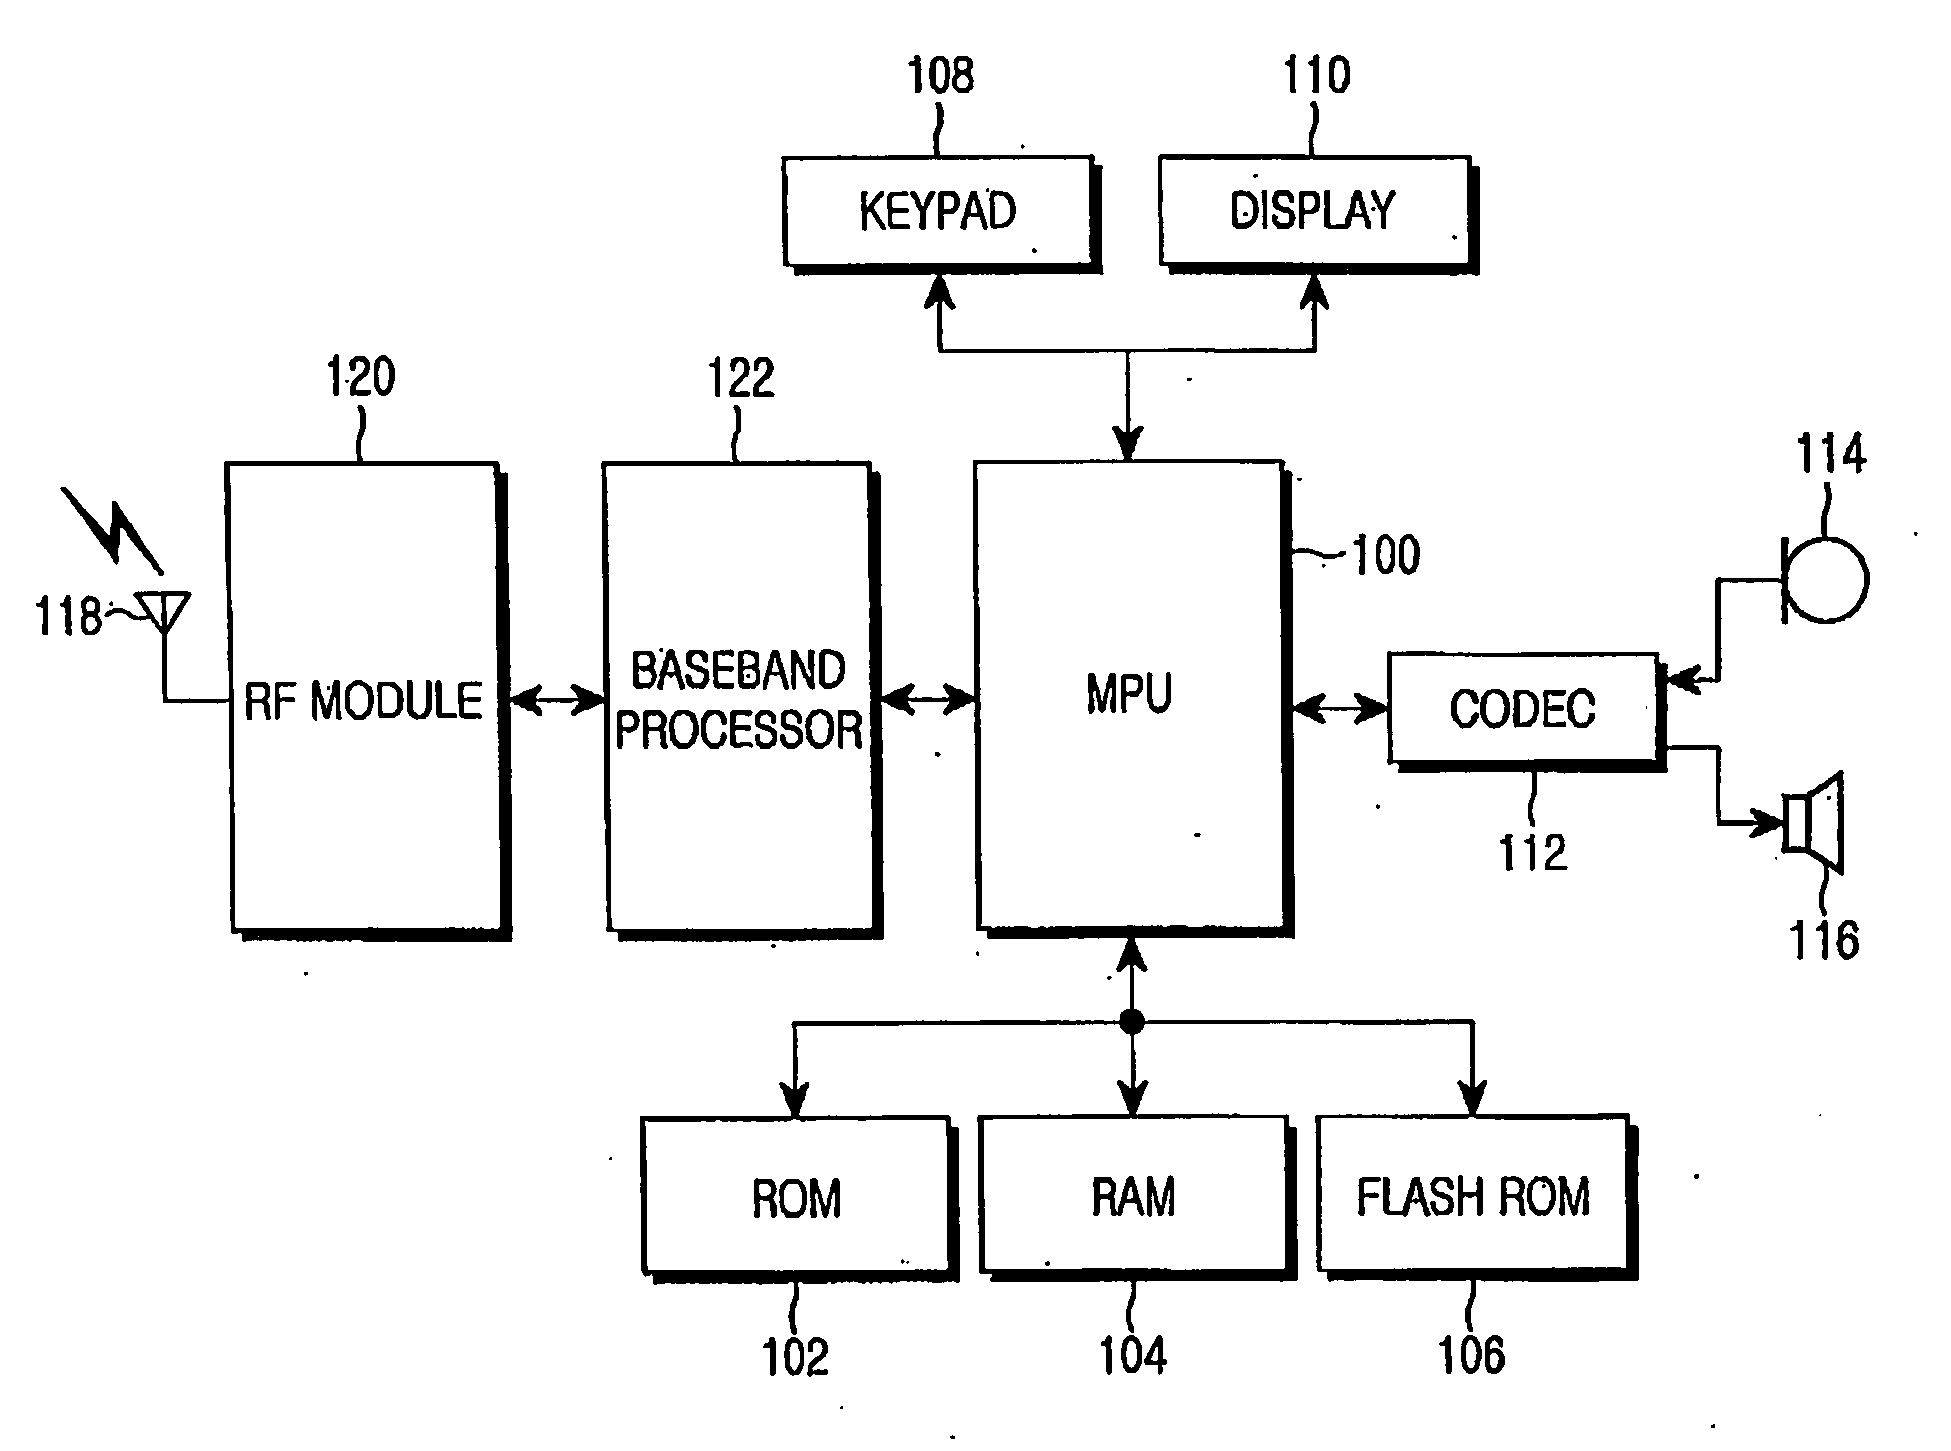 Apparatus and method for canceling SMS message transmission and retaining received SMS message